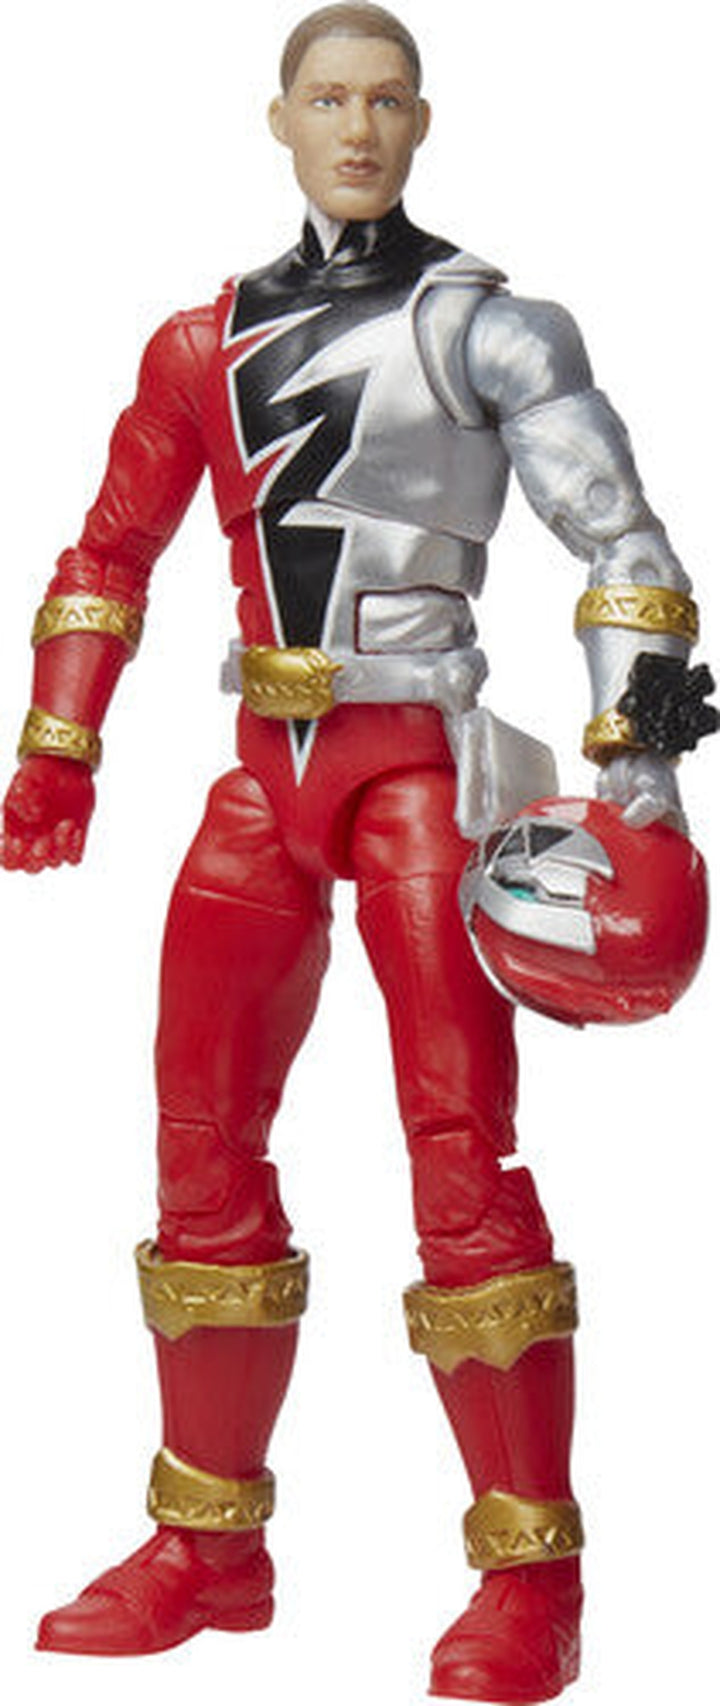 Hasbro Collectibles - Power Rangers Lightning Collection Dino Fury Red Ranger Figure